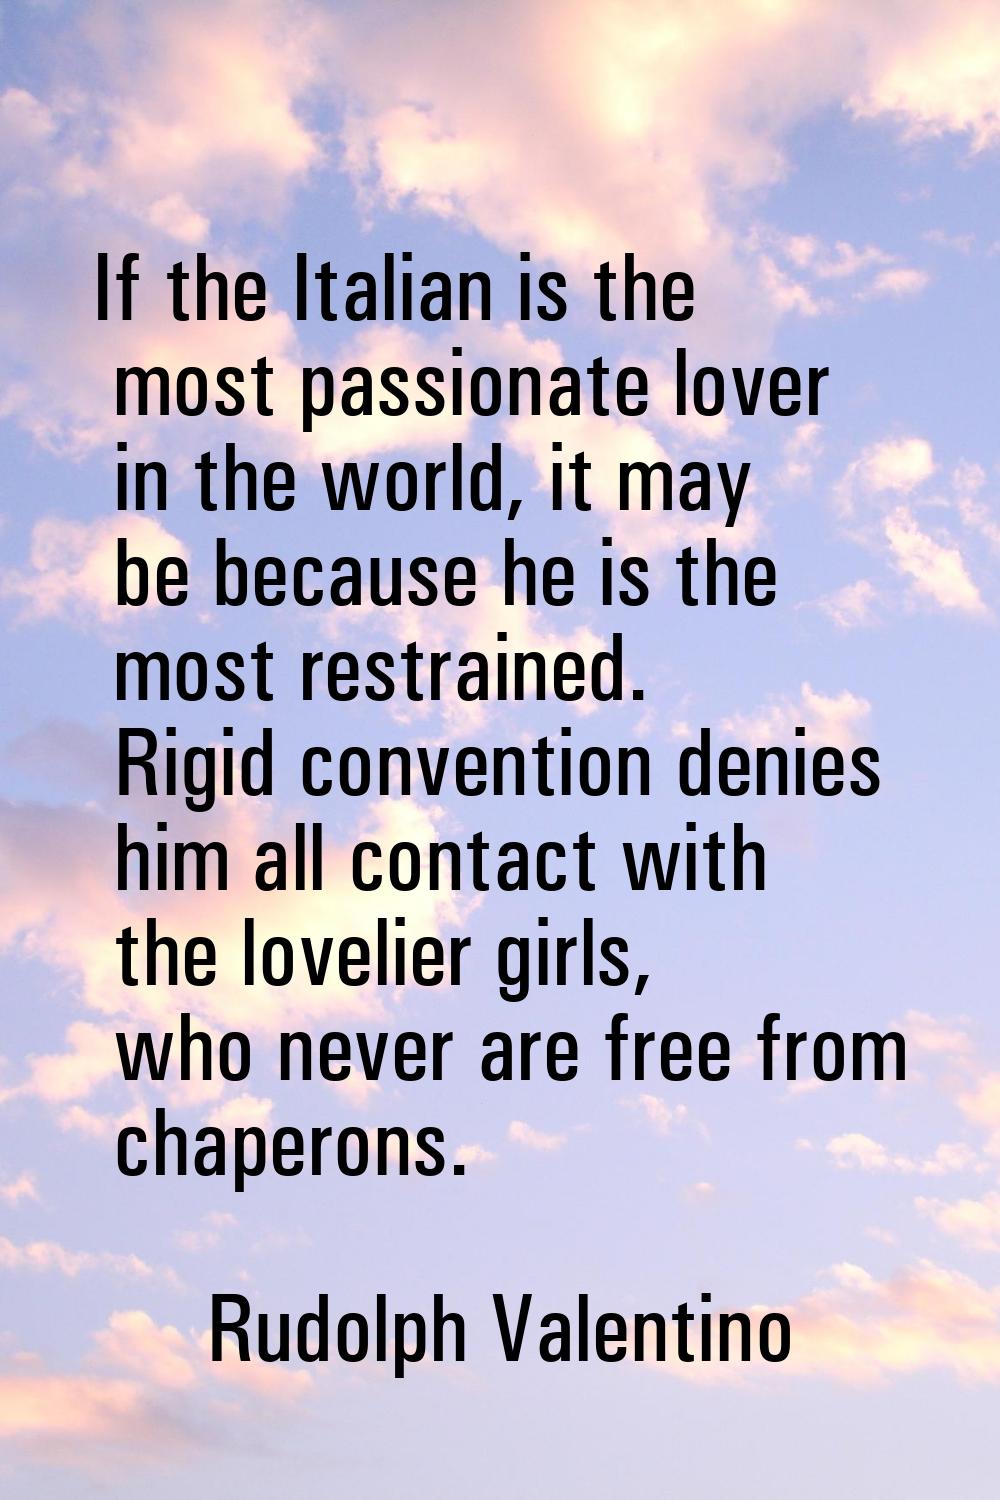 If the Italian is the most passionate lover in the world, it may be because he is the most restrain